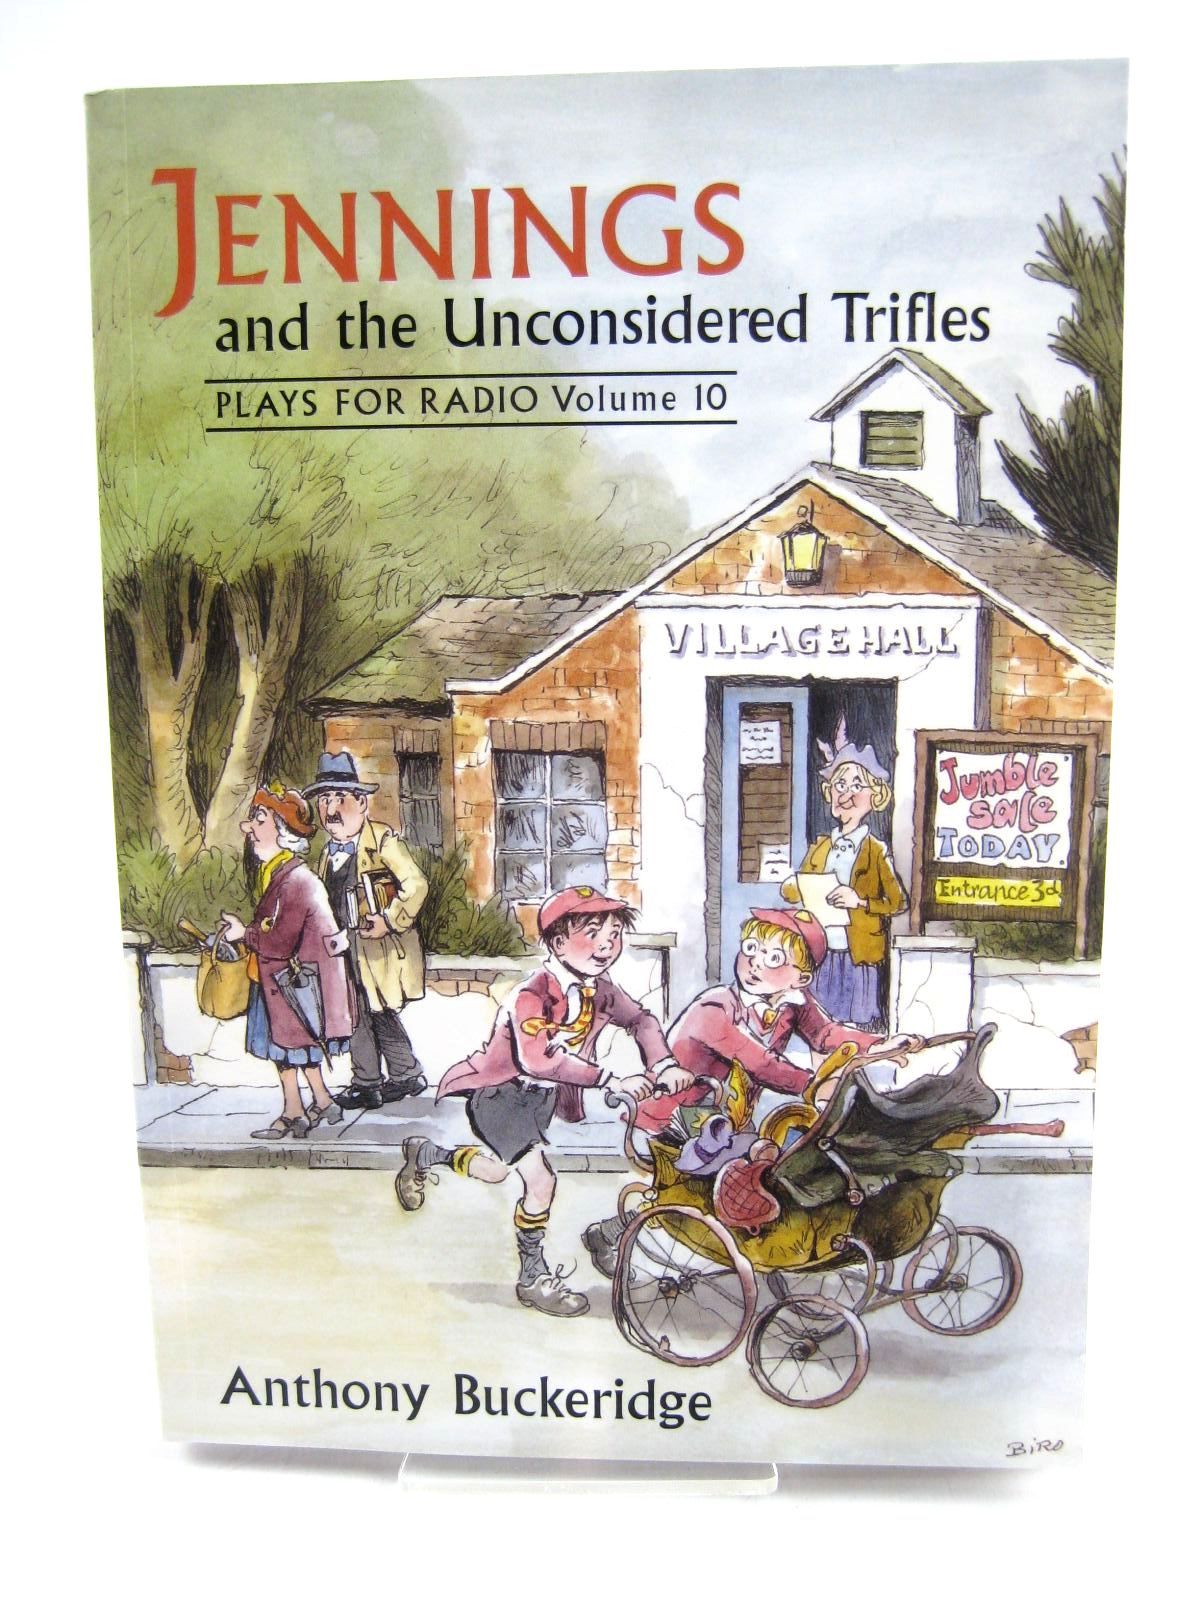 Cover of JENNINGS AND THE UNCONSIDERED TRIFLES by Anthony Buckeridge